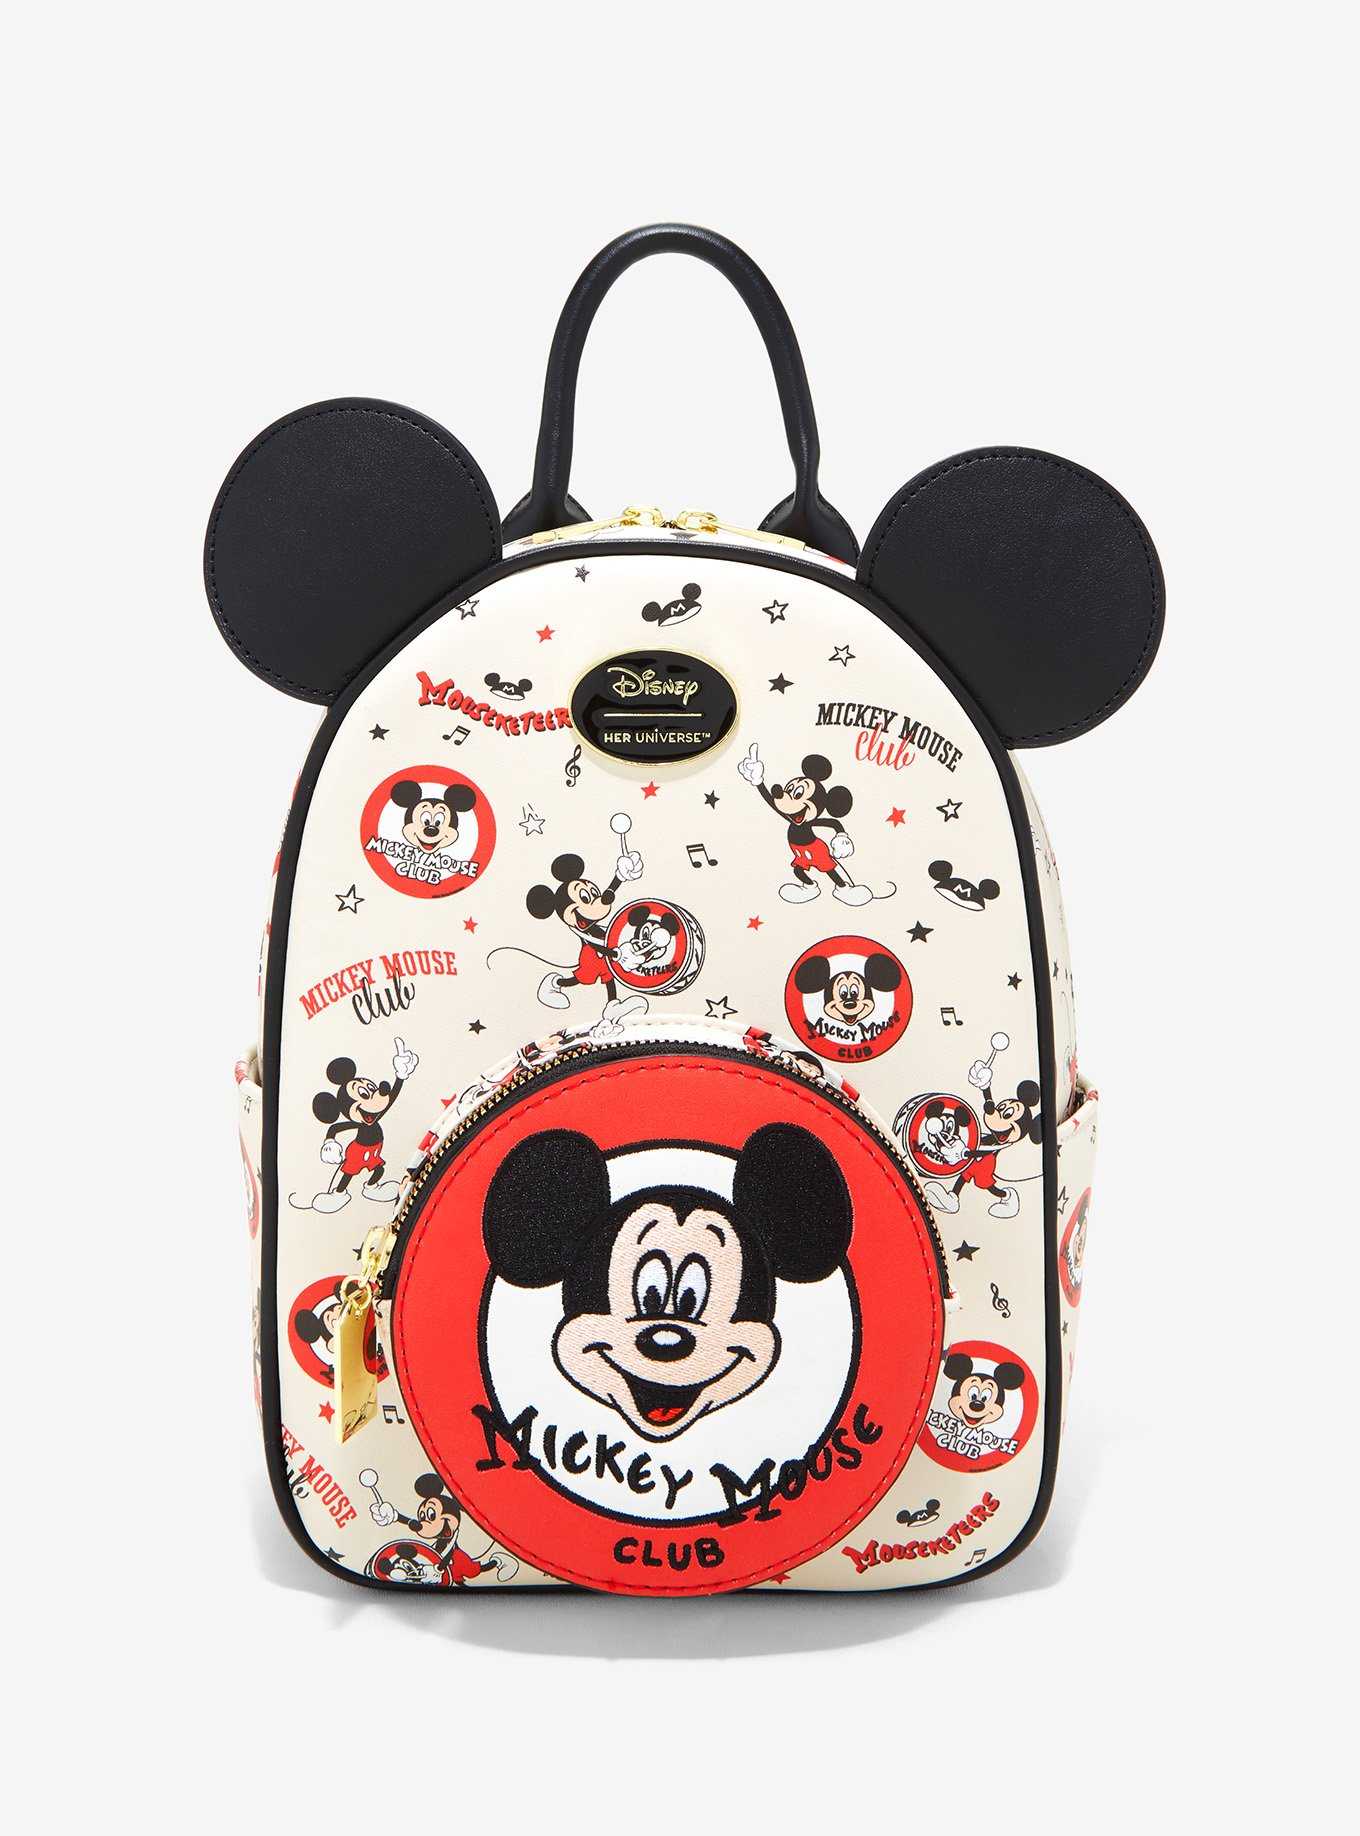 Her Universe Disney100 Mickey Mouse Club Vintage Mini Backpack, , hi-res